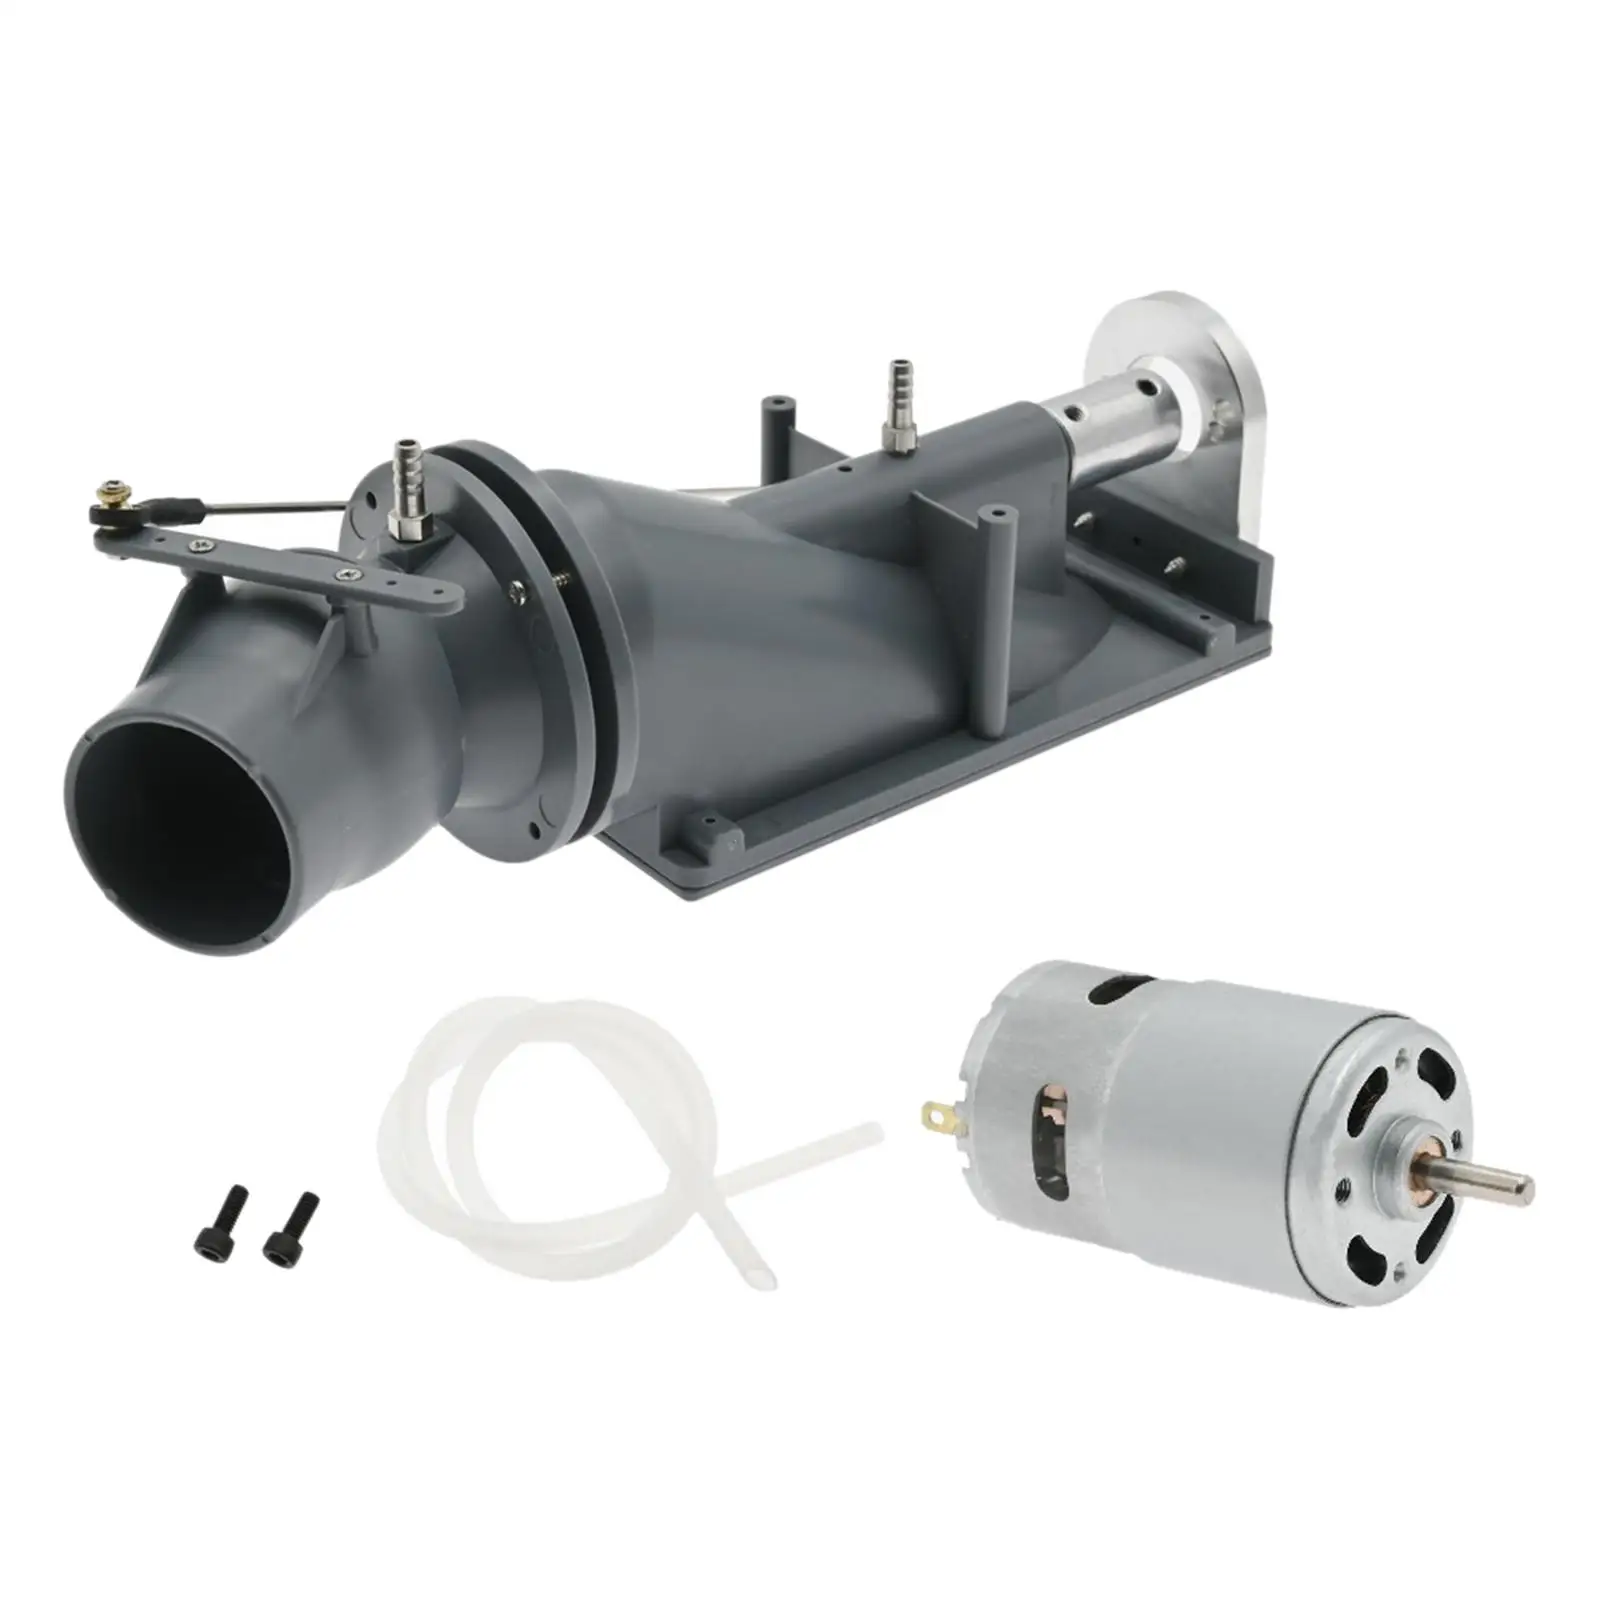 40mm Water Jet Thruster Boat Pump with 775 Motor Boat Pump Spray Thruster for Boat Model Parts Accessory